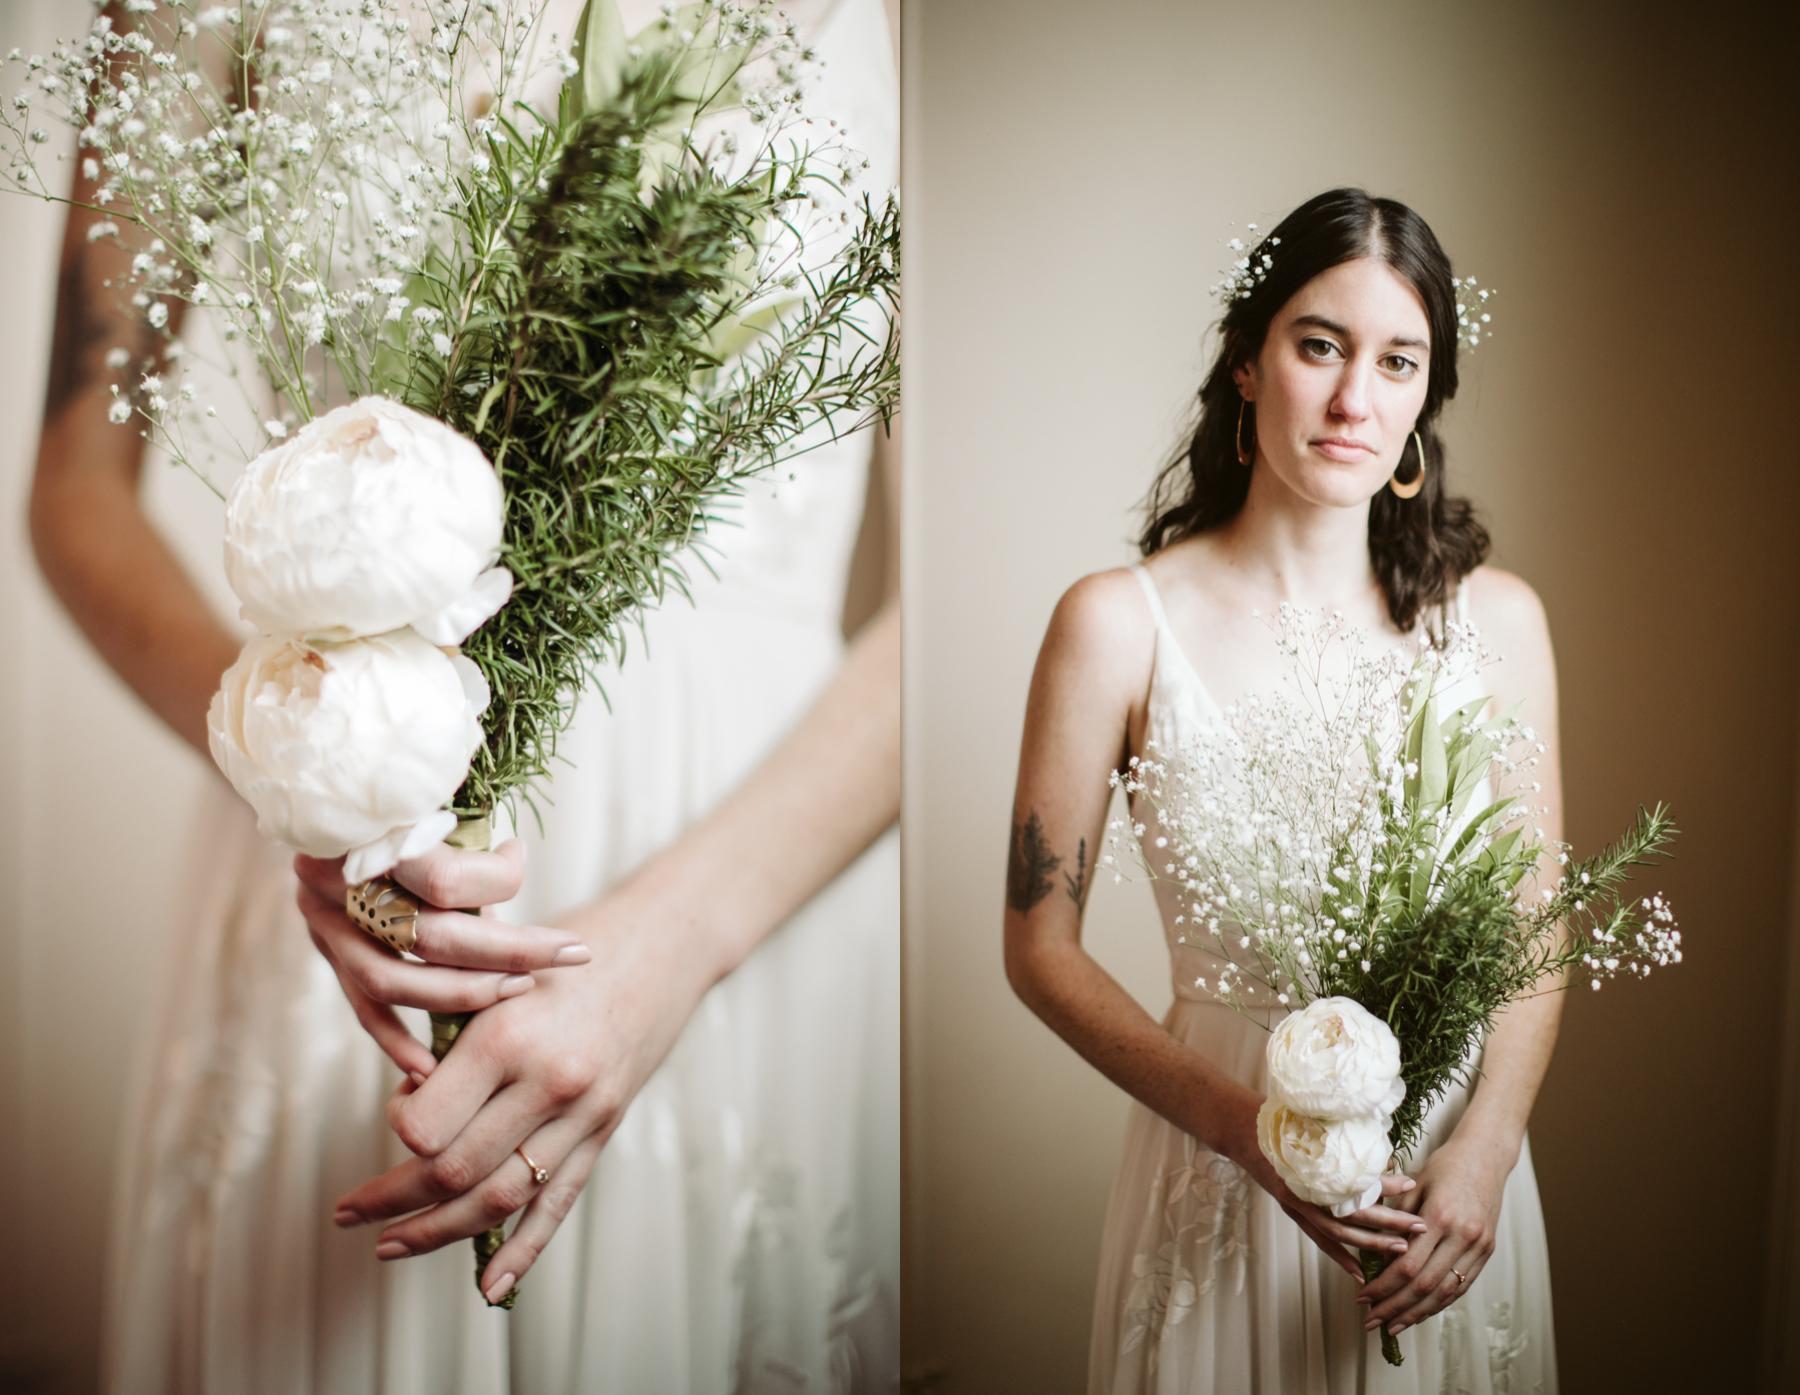 Elegant indoor bridal portraits at a downtown knoxville wedding at redeemer church